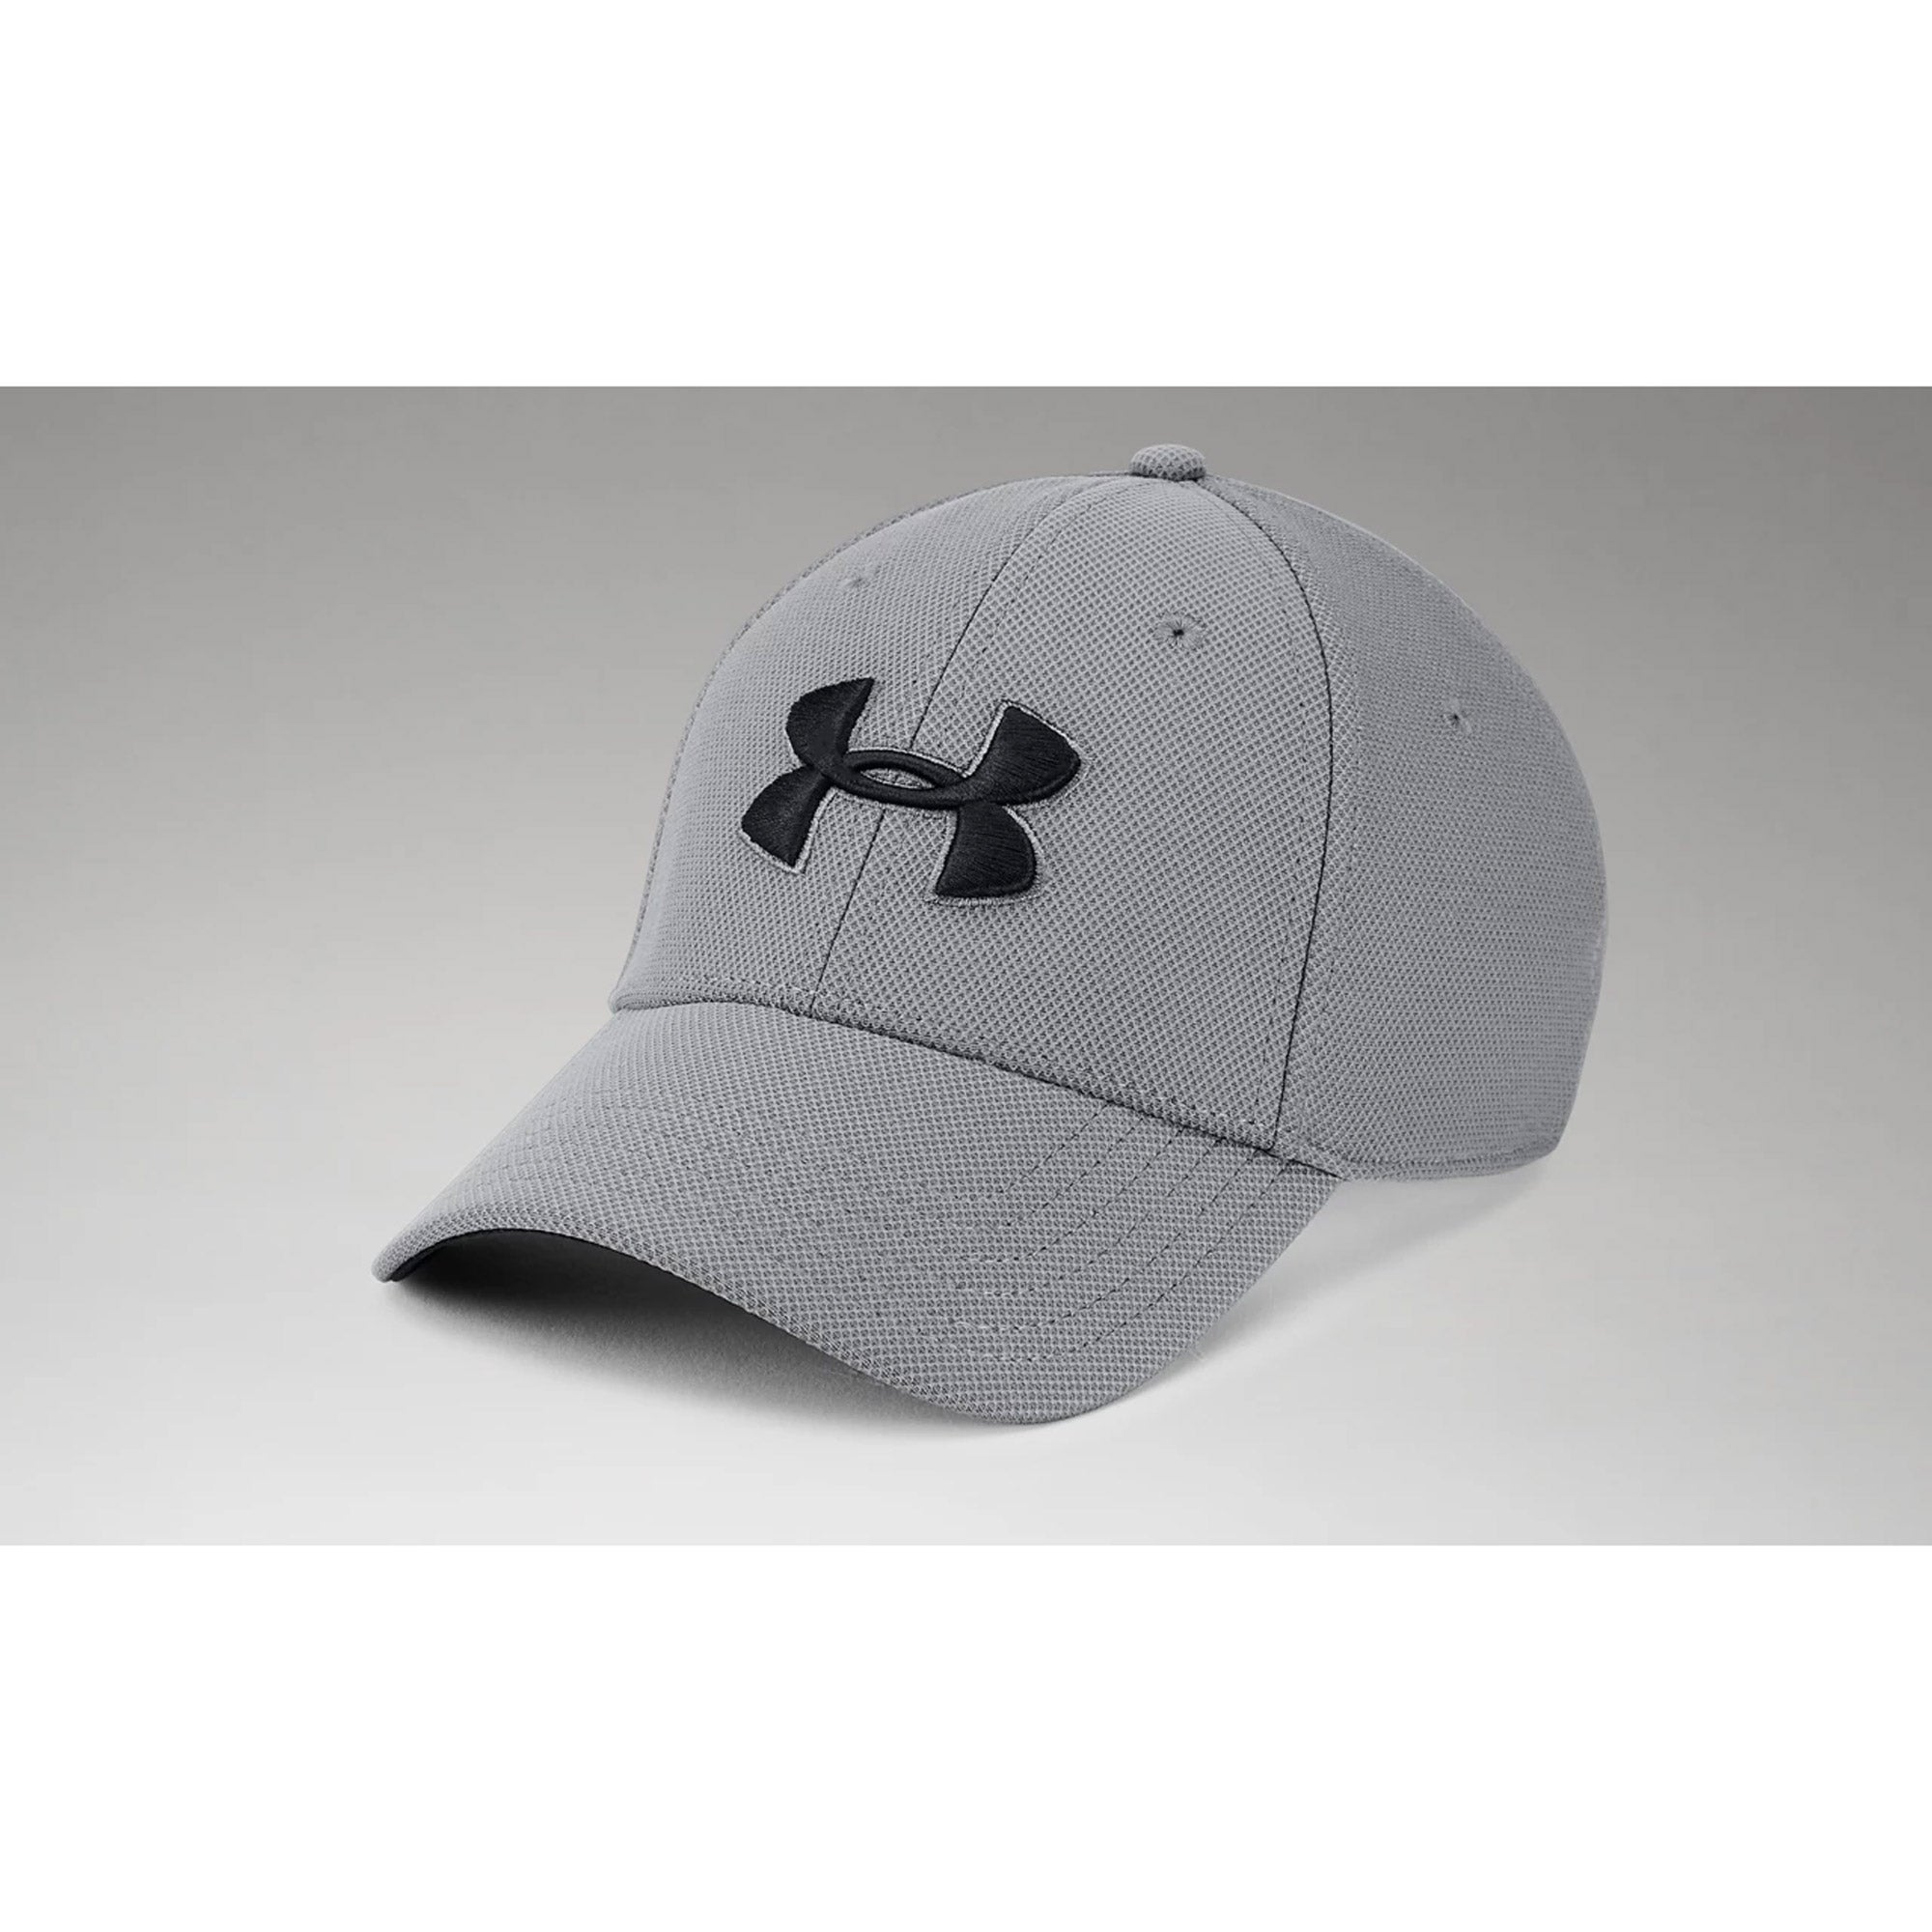 Under Armour 1305036-040 UA Blitzing 3.0 Ball Cap in Graphite with Black  Logo